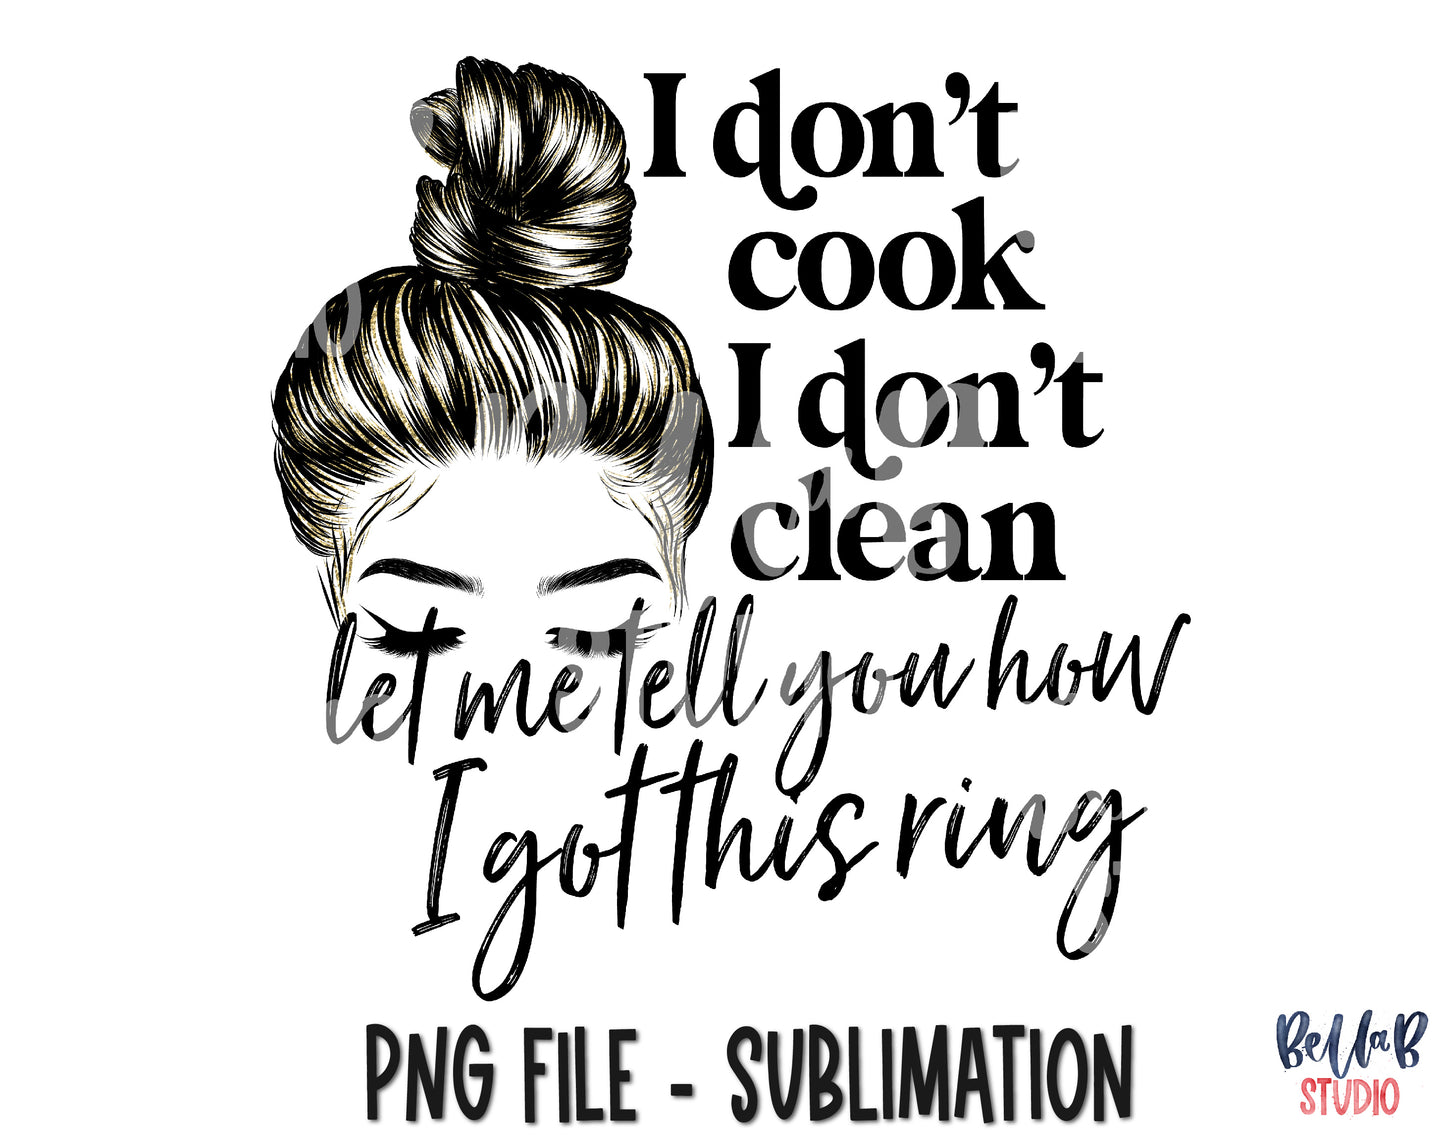 I Don't Cook I Don't Clean Let me Tell You How I Got This Ring Sublimation Design